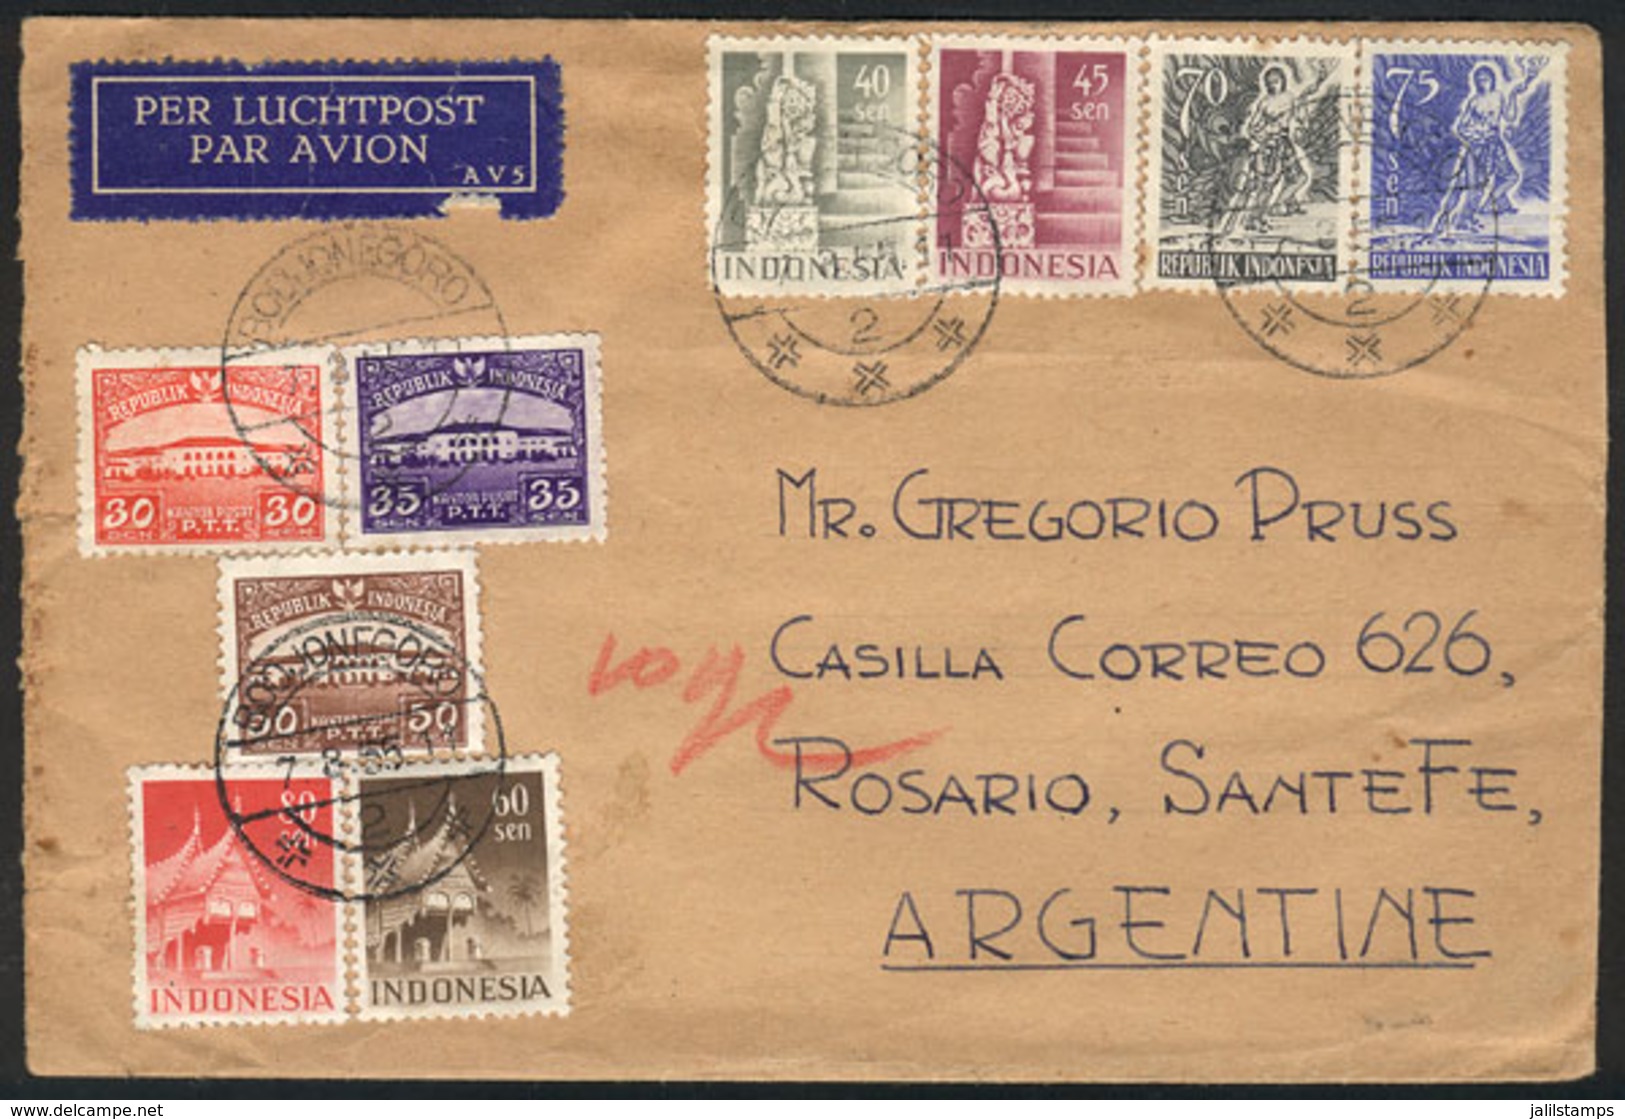 INDONESIA: Airmail Cover Sent From Bodjonegoro To Rosario On 7/AU/1955 With Nice Multicolored Postage, VF Quality! - Indonesien